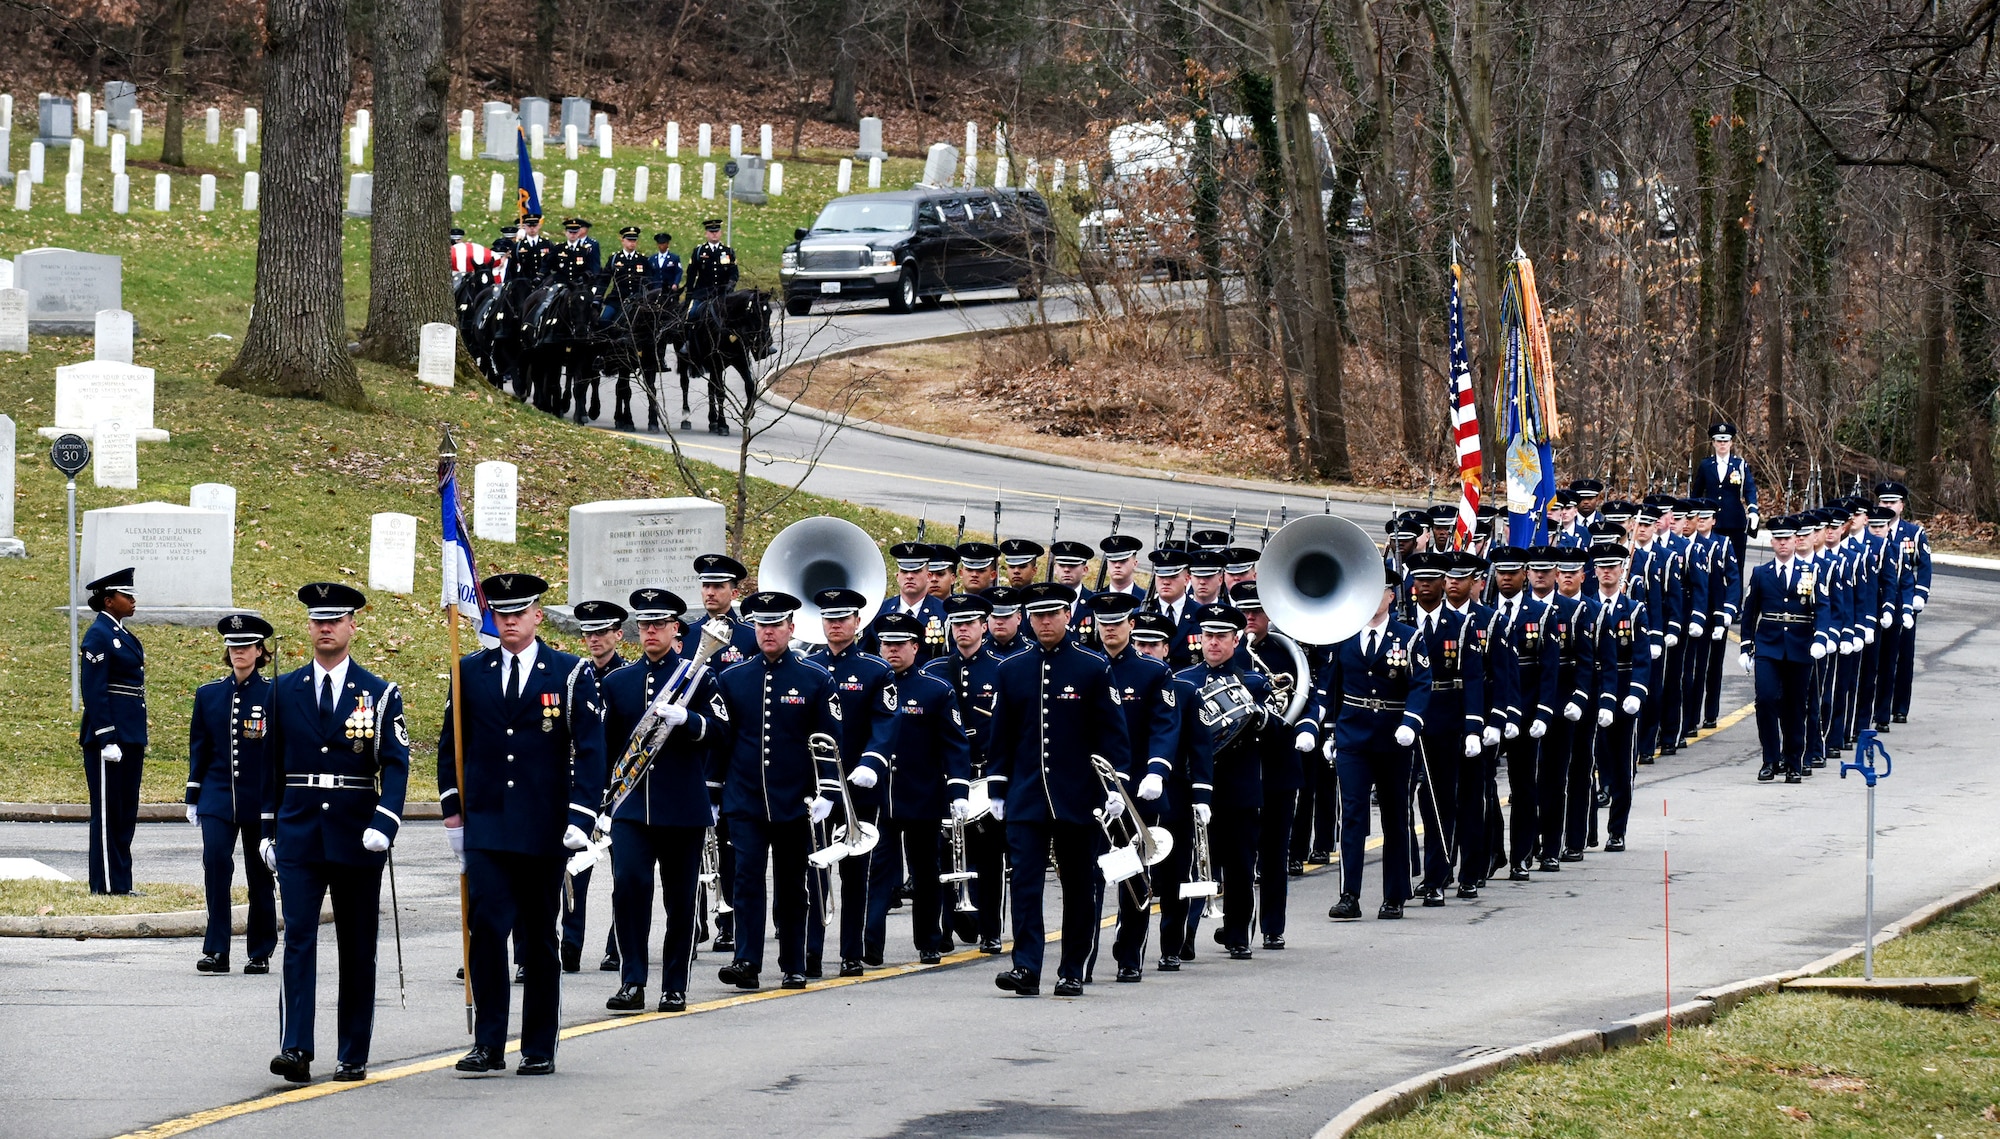 A caisson delivers the remains of retired U.S. Air Force Maj. Gen. Marcelite Harris during her full honors funeral at Arlington National Cemetery, Arlington, Va., Feb. 7, 2019. In 1991, Harris became the first African-American women to earn the rank of brigadier general in the U.S. Air Force. (U.S. Air Force photo by Staff Sgt. Rusty Frank)